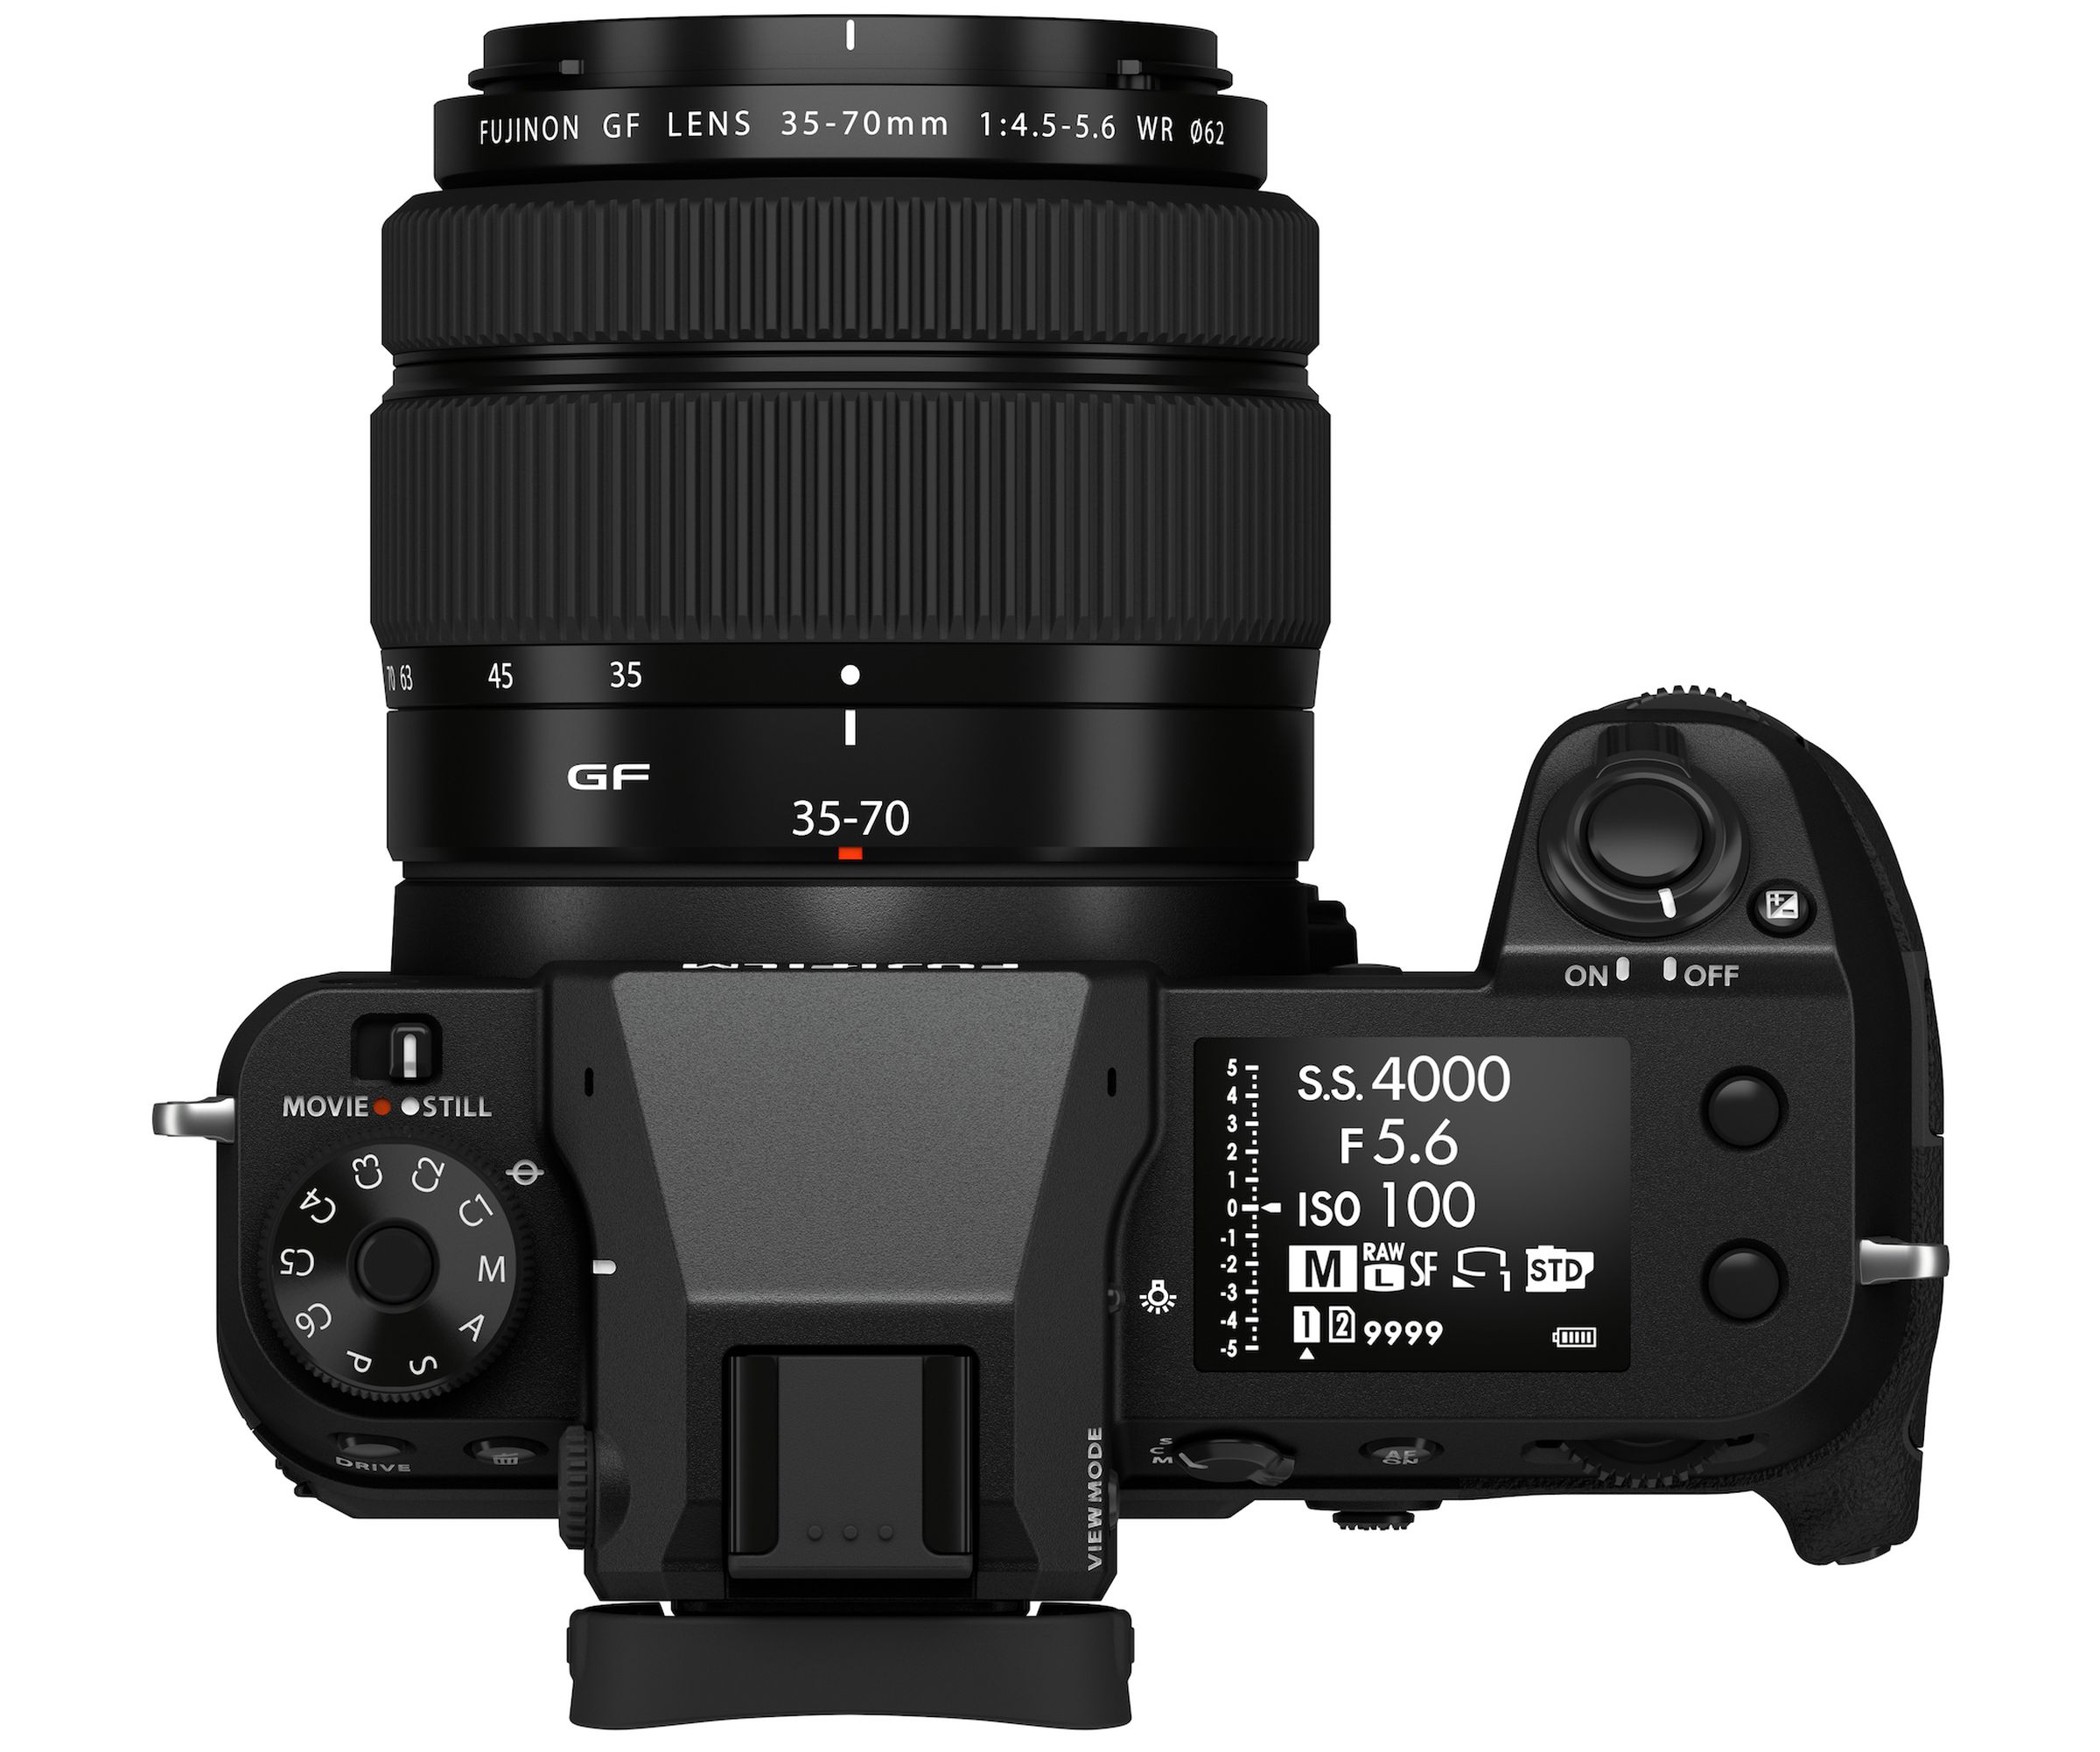 The GFX 50S II body is largely identical to the GFX 100S.